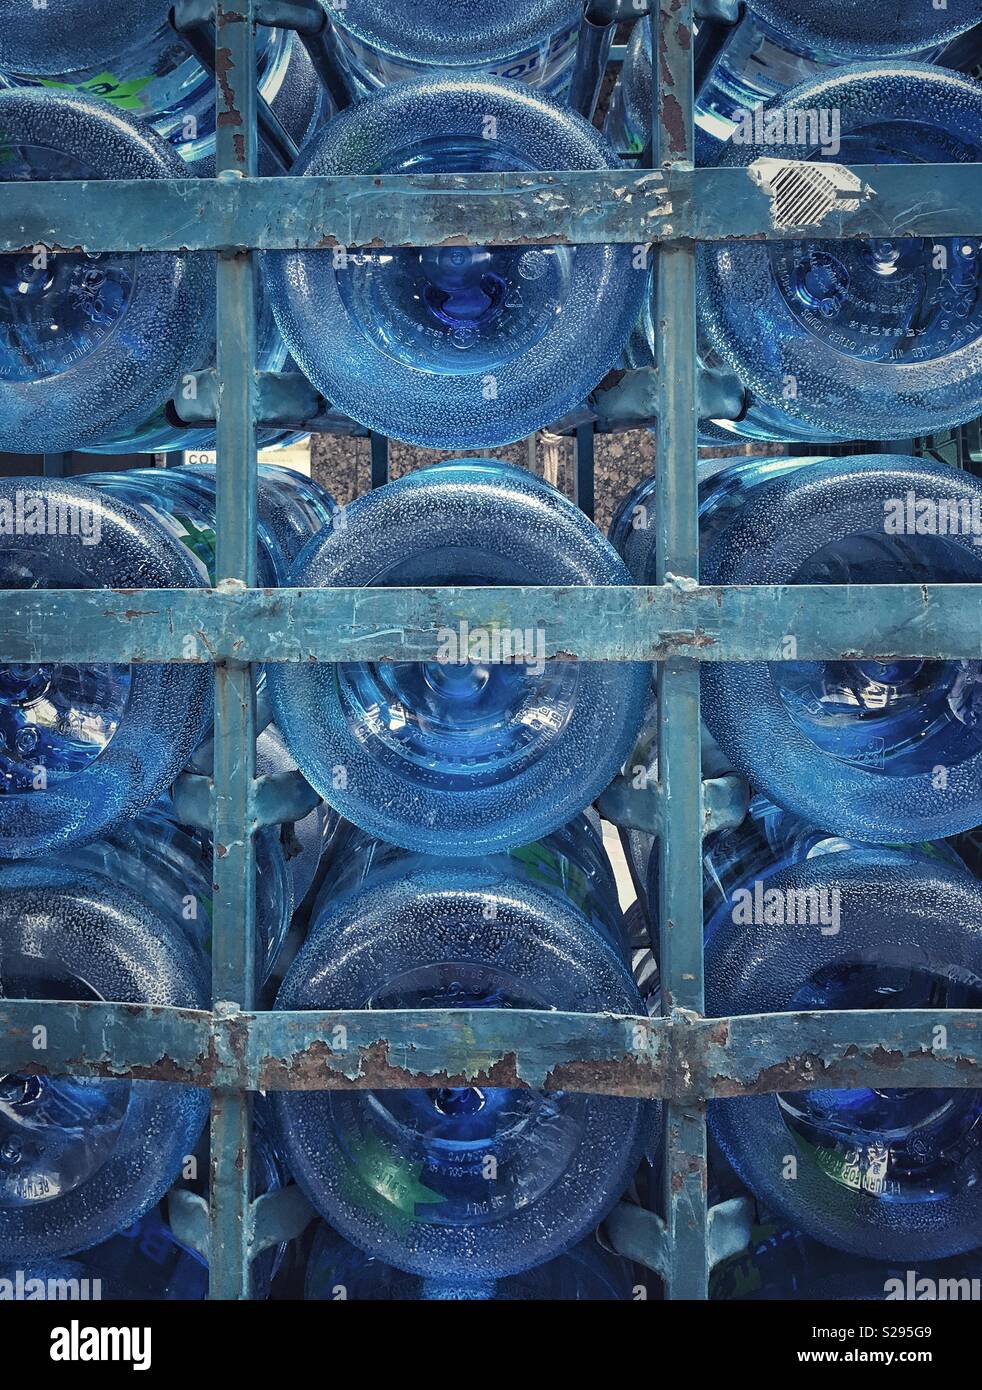 Cage with 5-gallon water jugs Stock Photo